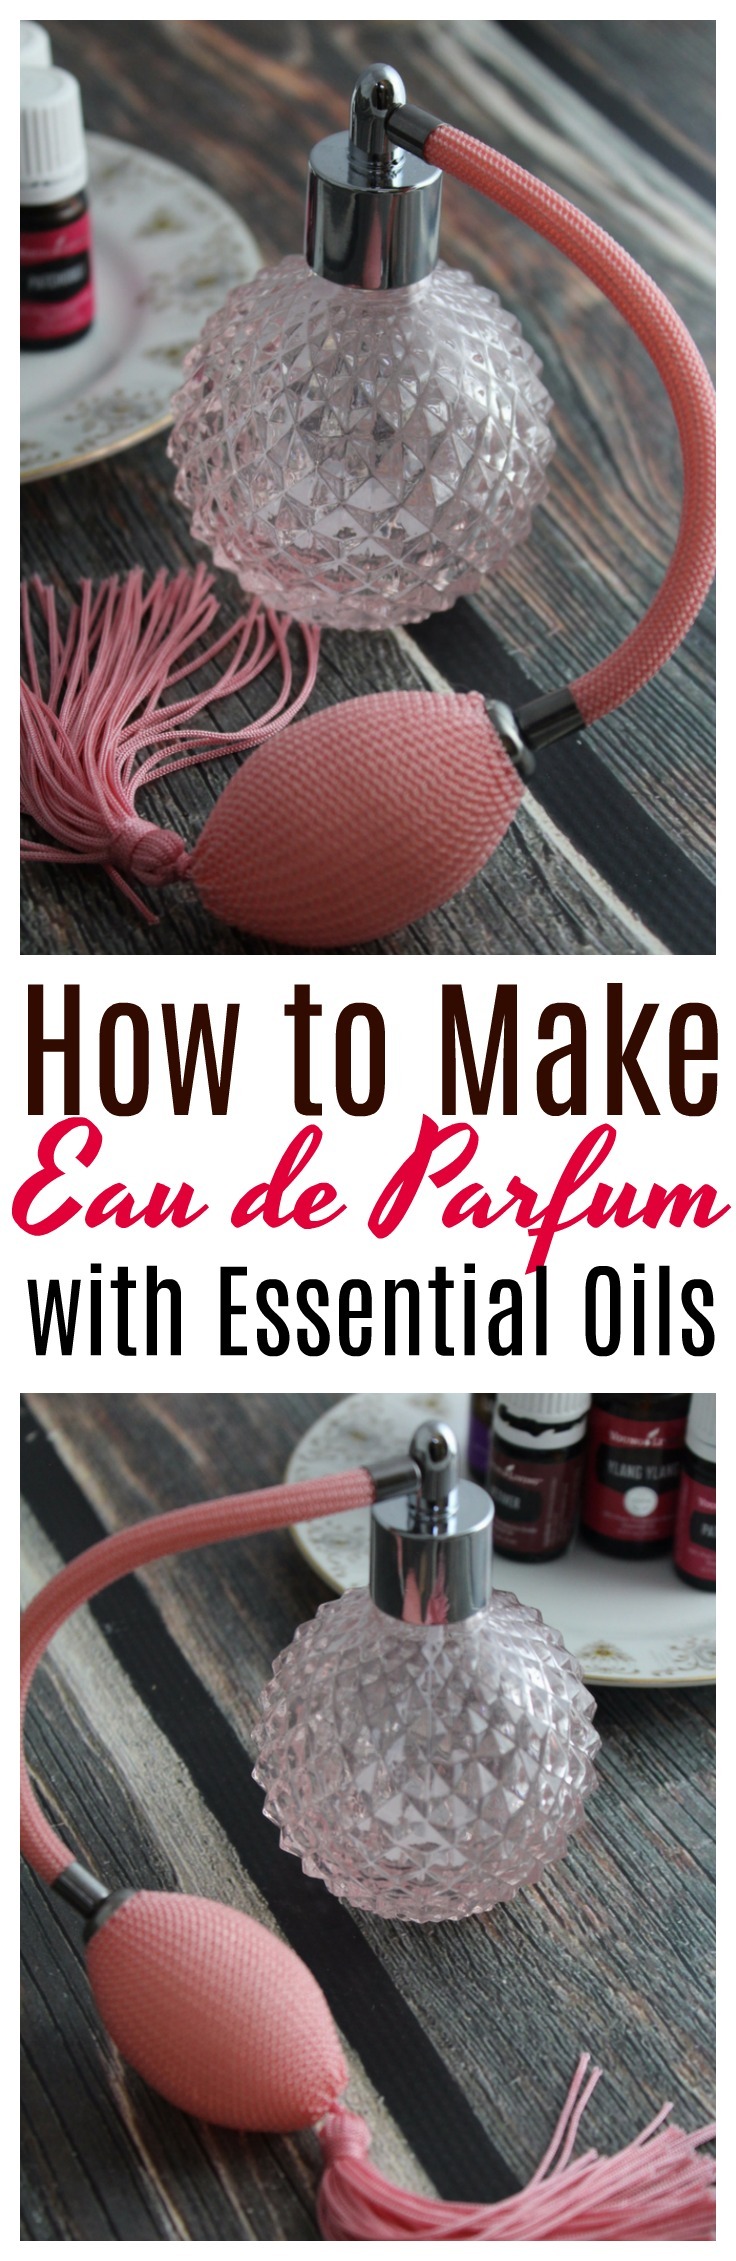 Find out how to make your own homemade perfume with essential oils - for you, or to give as a gift!  #perfume | #essentialoils | #DIY